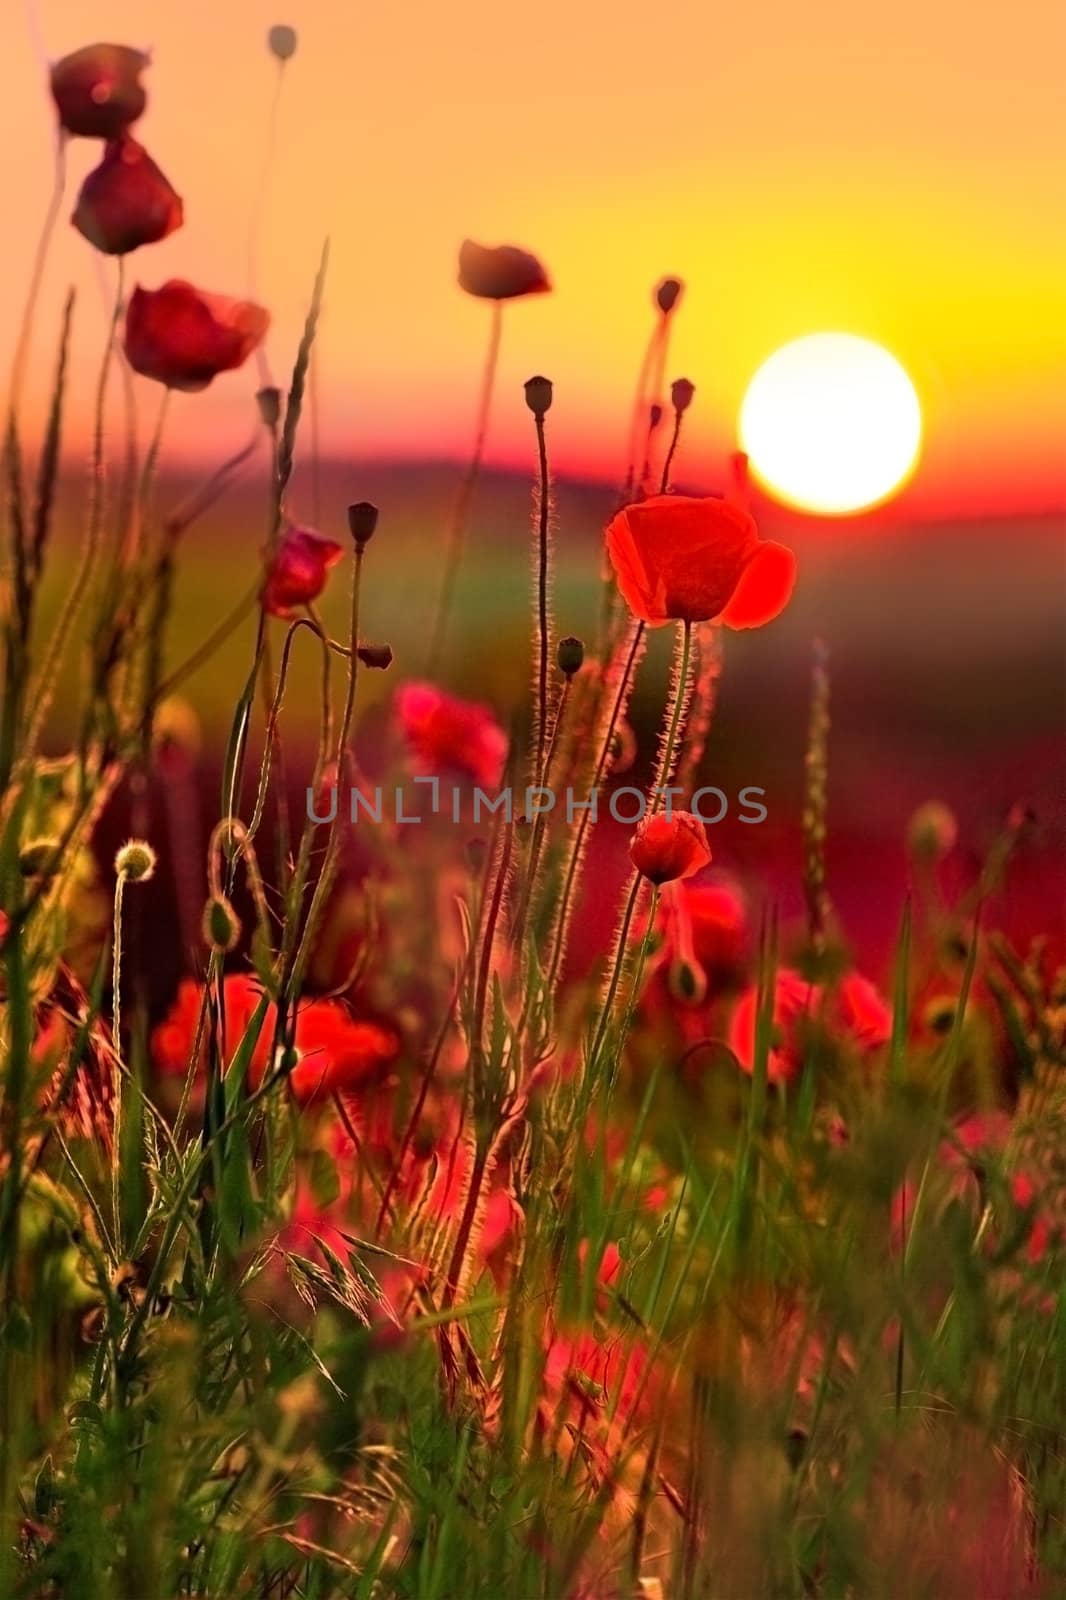 poppies at sunset by andrew_mayovskyy